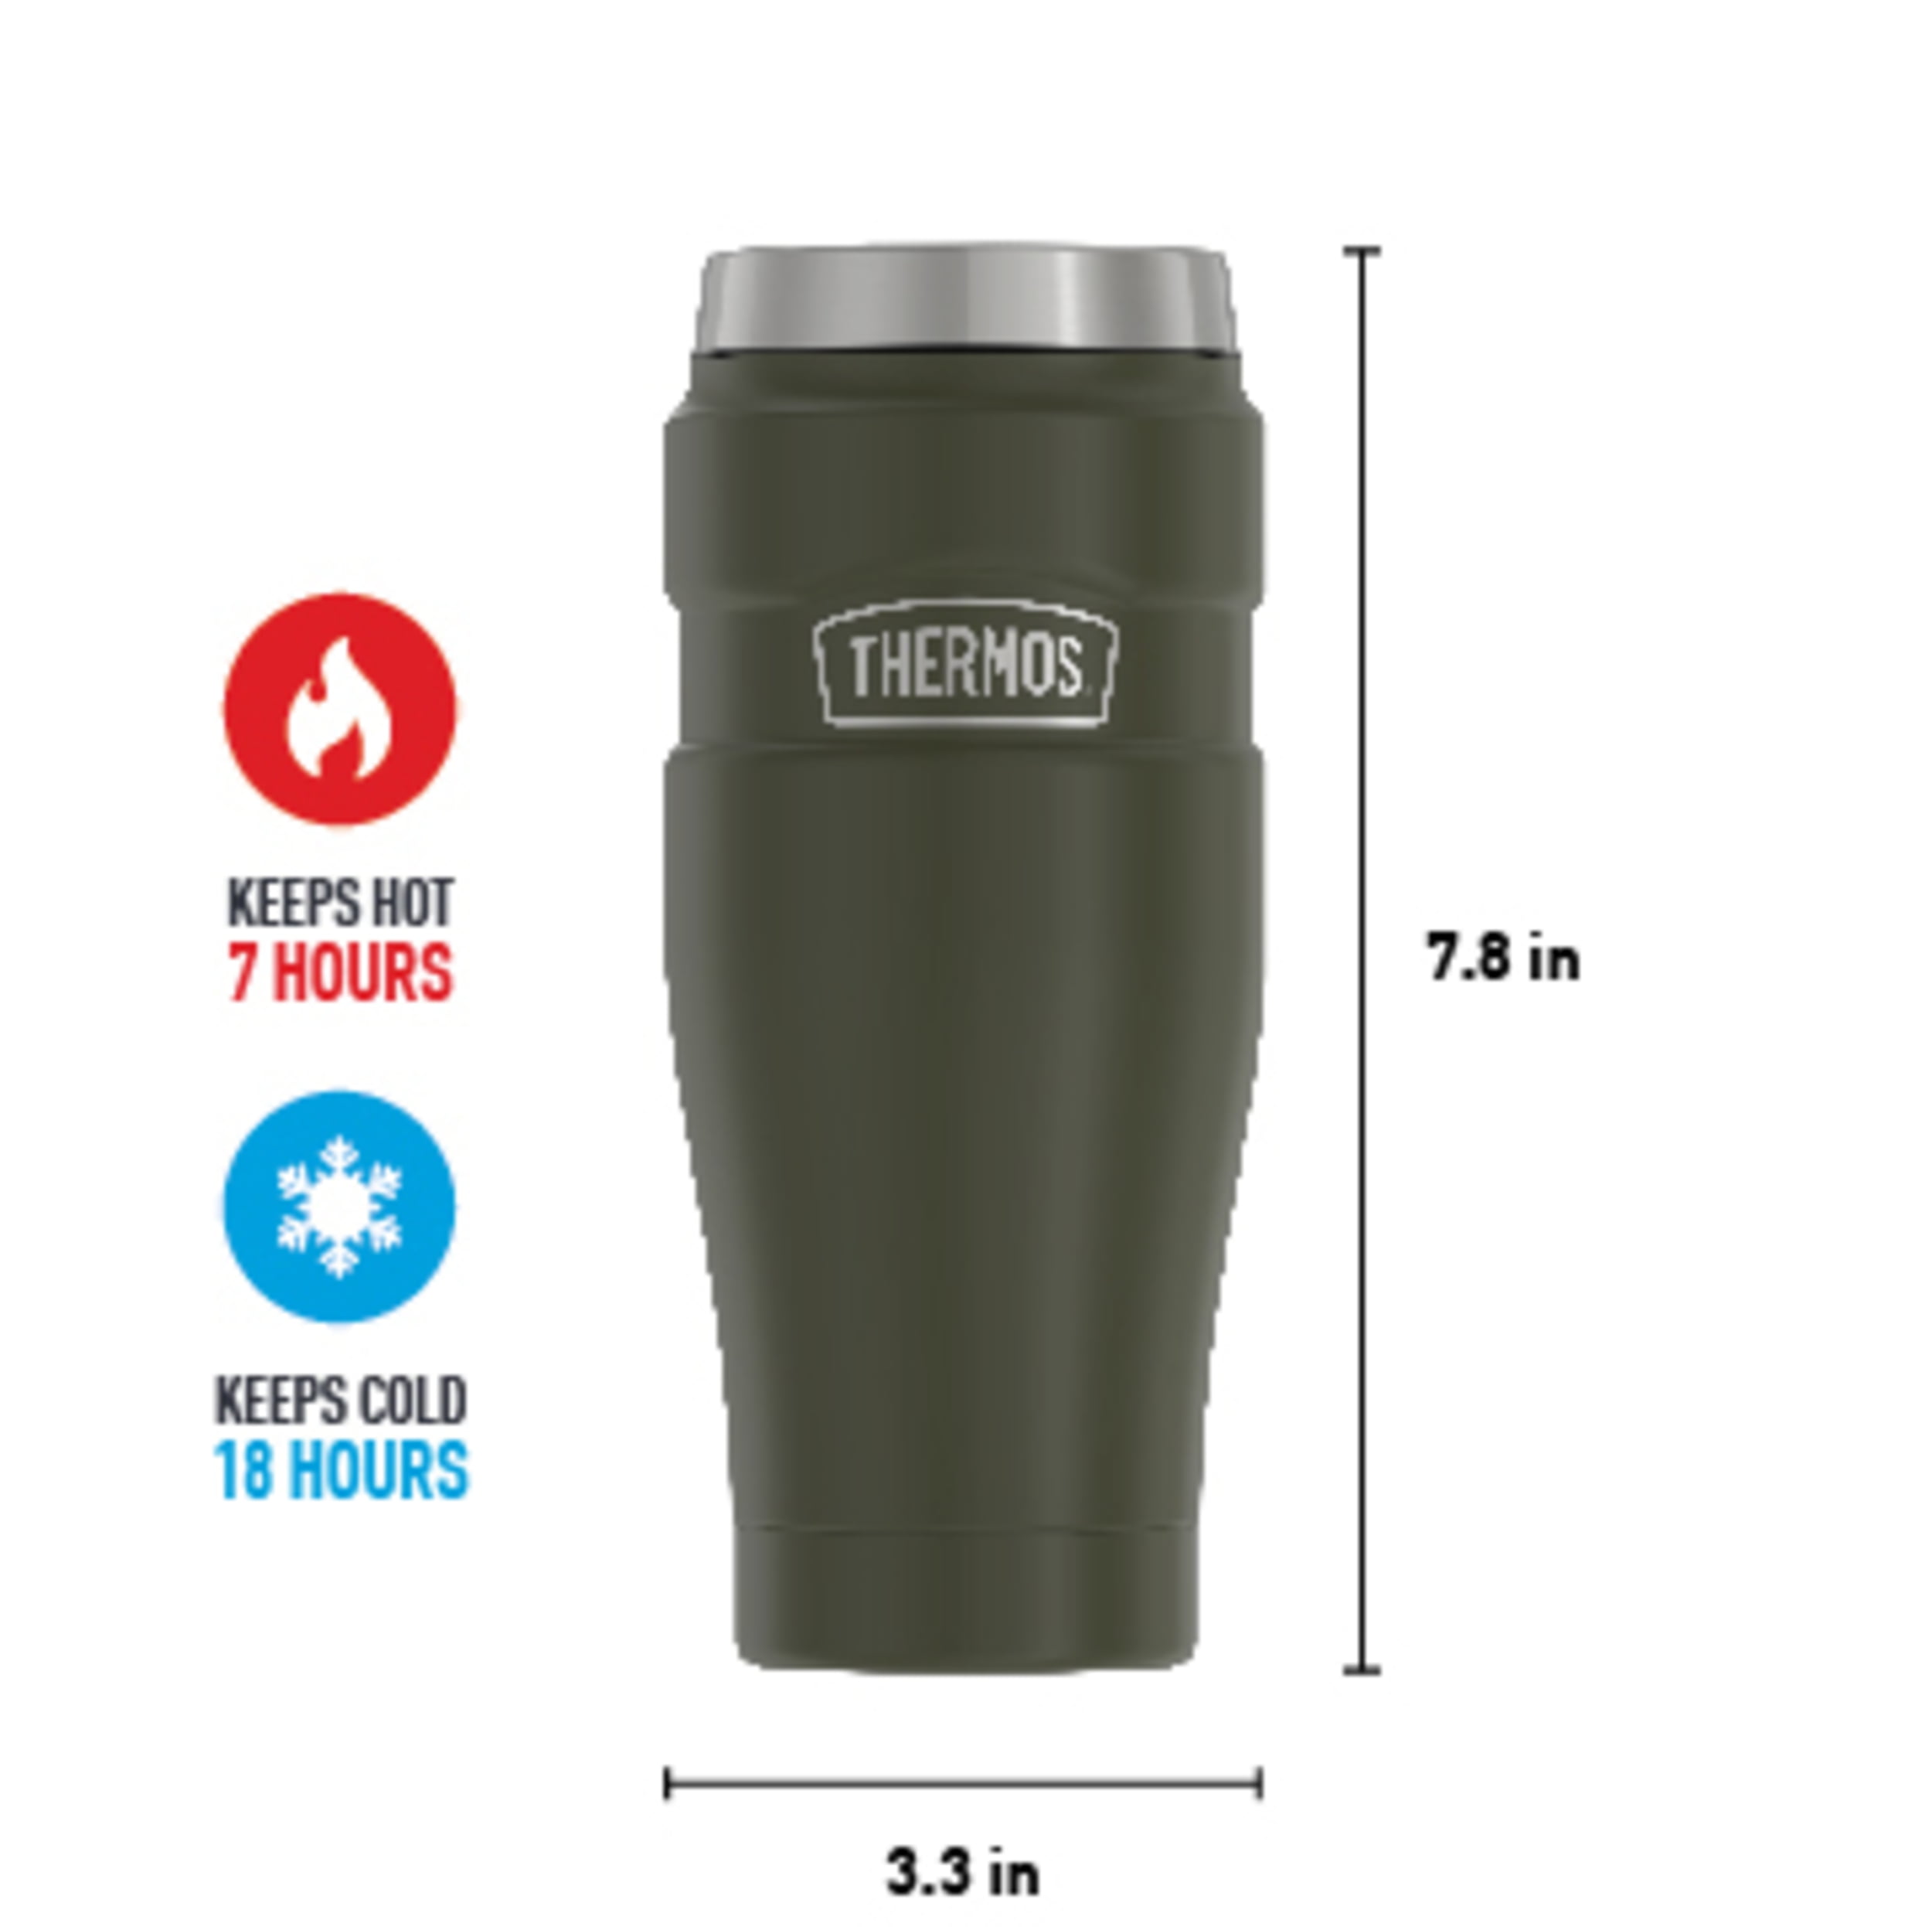 Bargains by Green - Thermos Stainless Steel King Travel Tumbler, 2-Pack  Price:$15.00 New Retail:$25 Thermos Stainless Steel King Travel Tumbler, 2- Pack Features: Double Wall Vacuum Insulated Vessel for Up To 7-Hour Hot